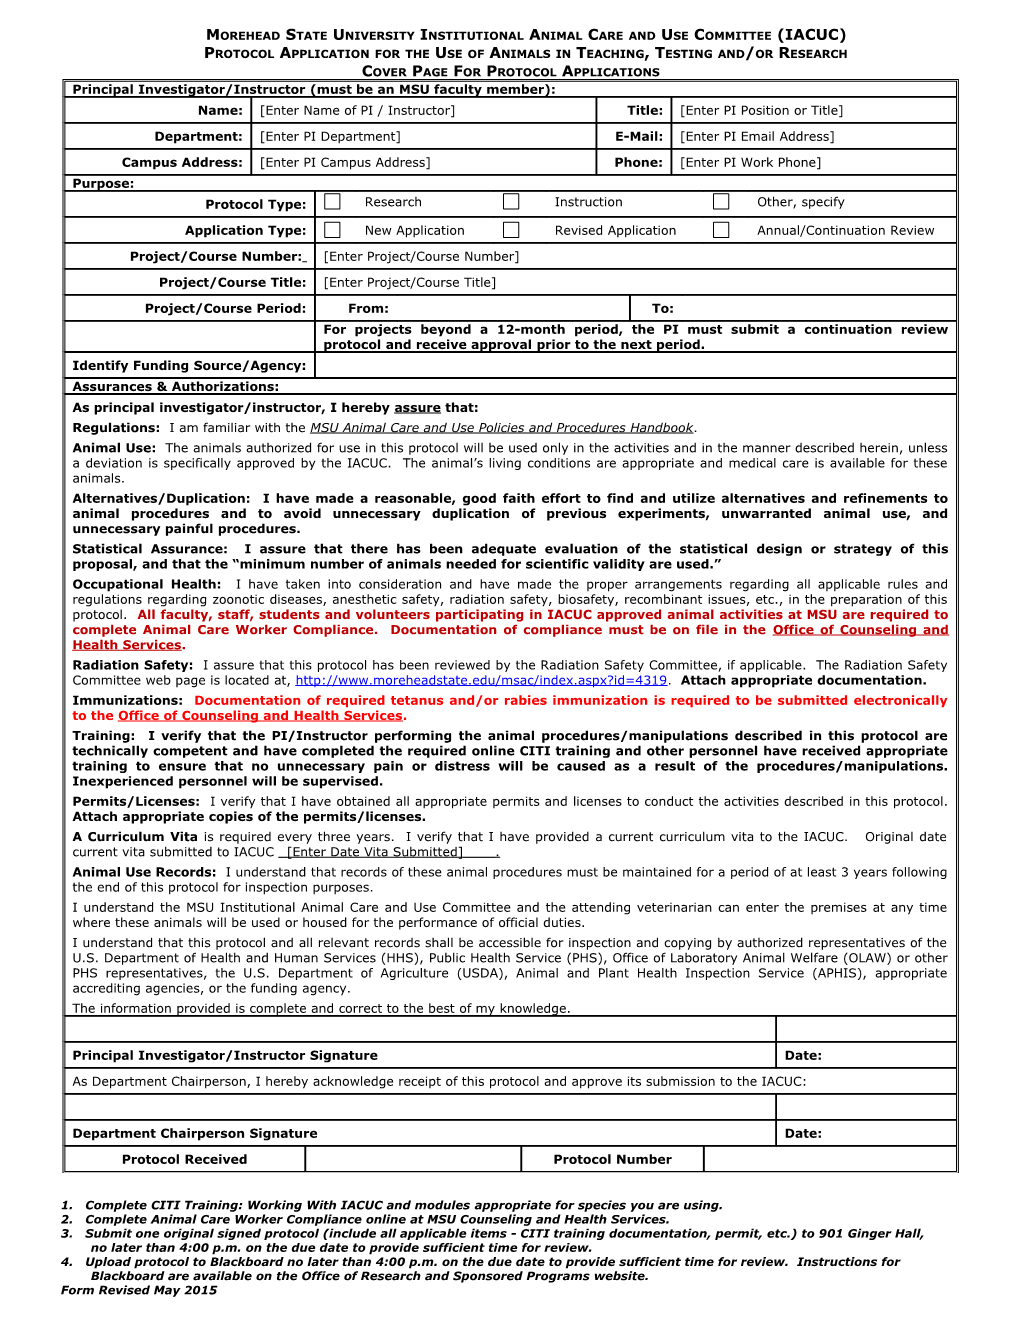 Application Form Revised May 2015